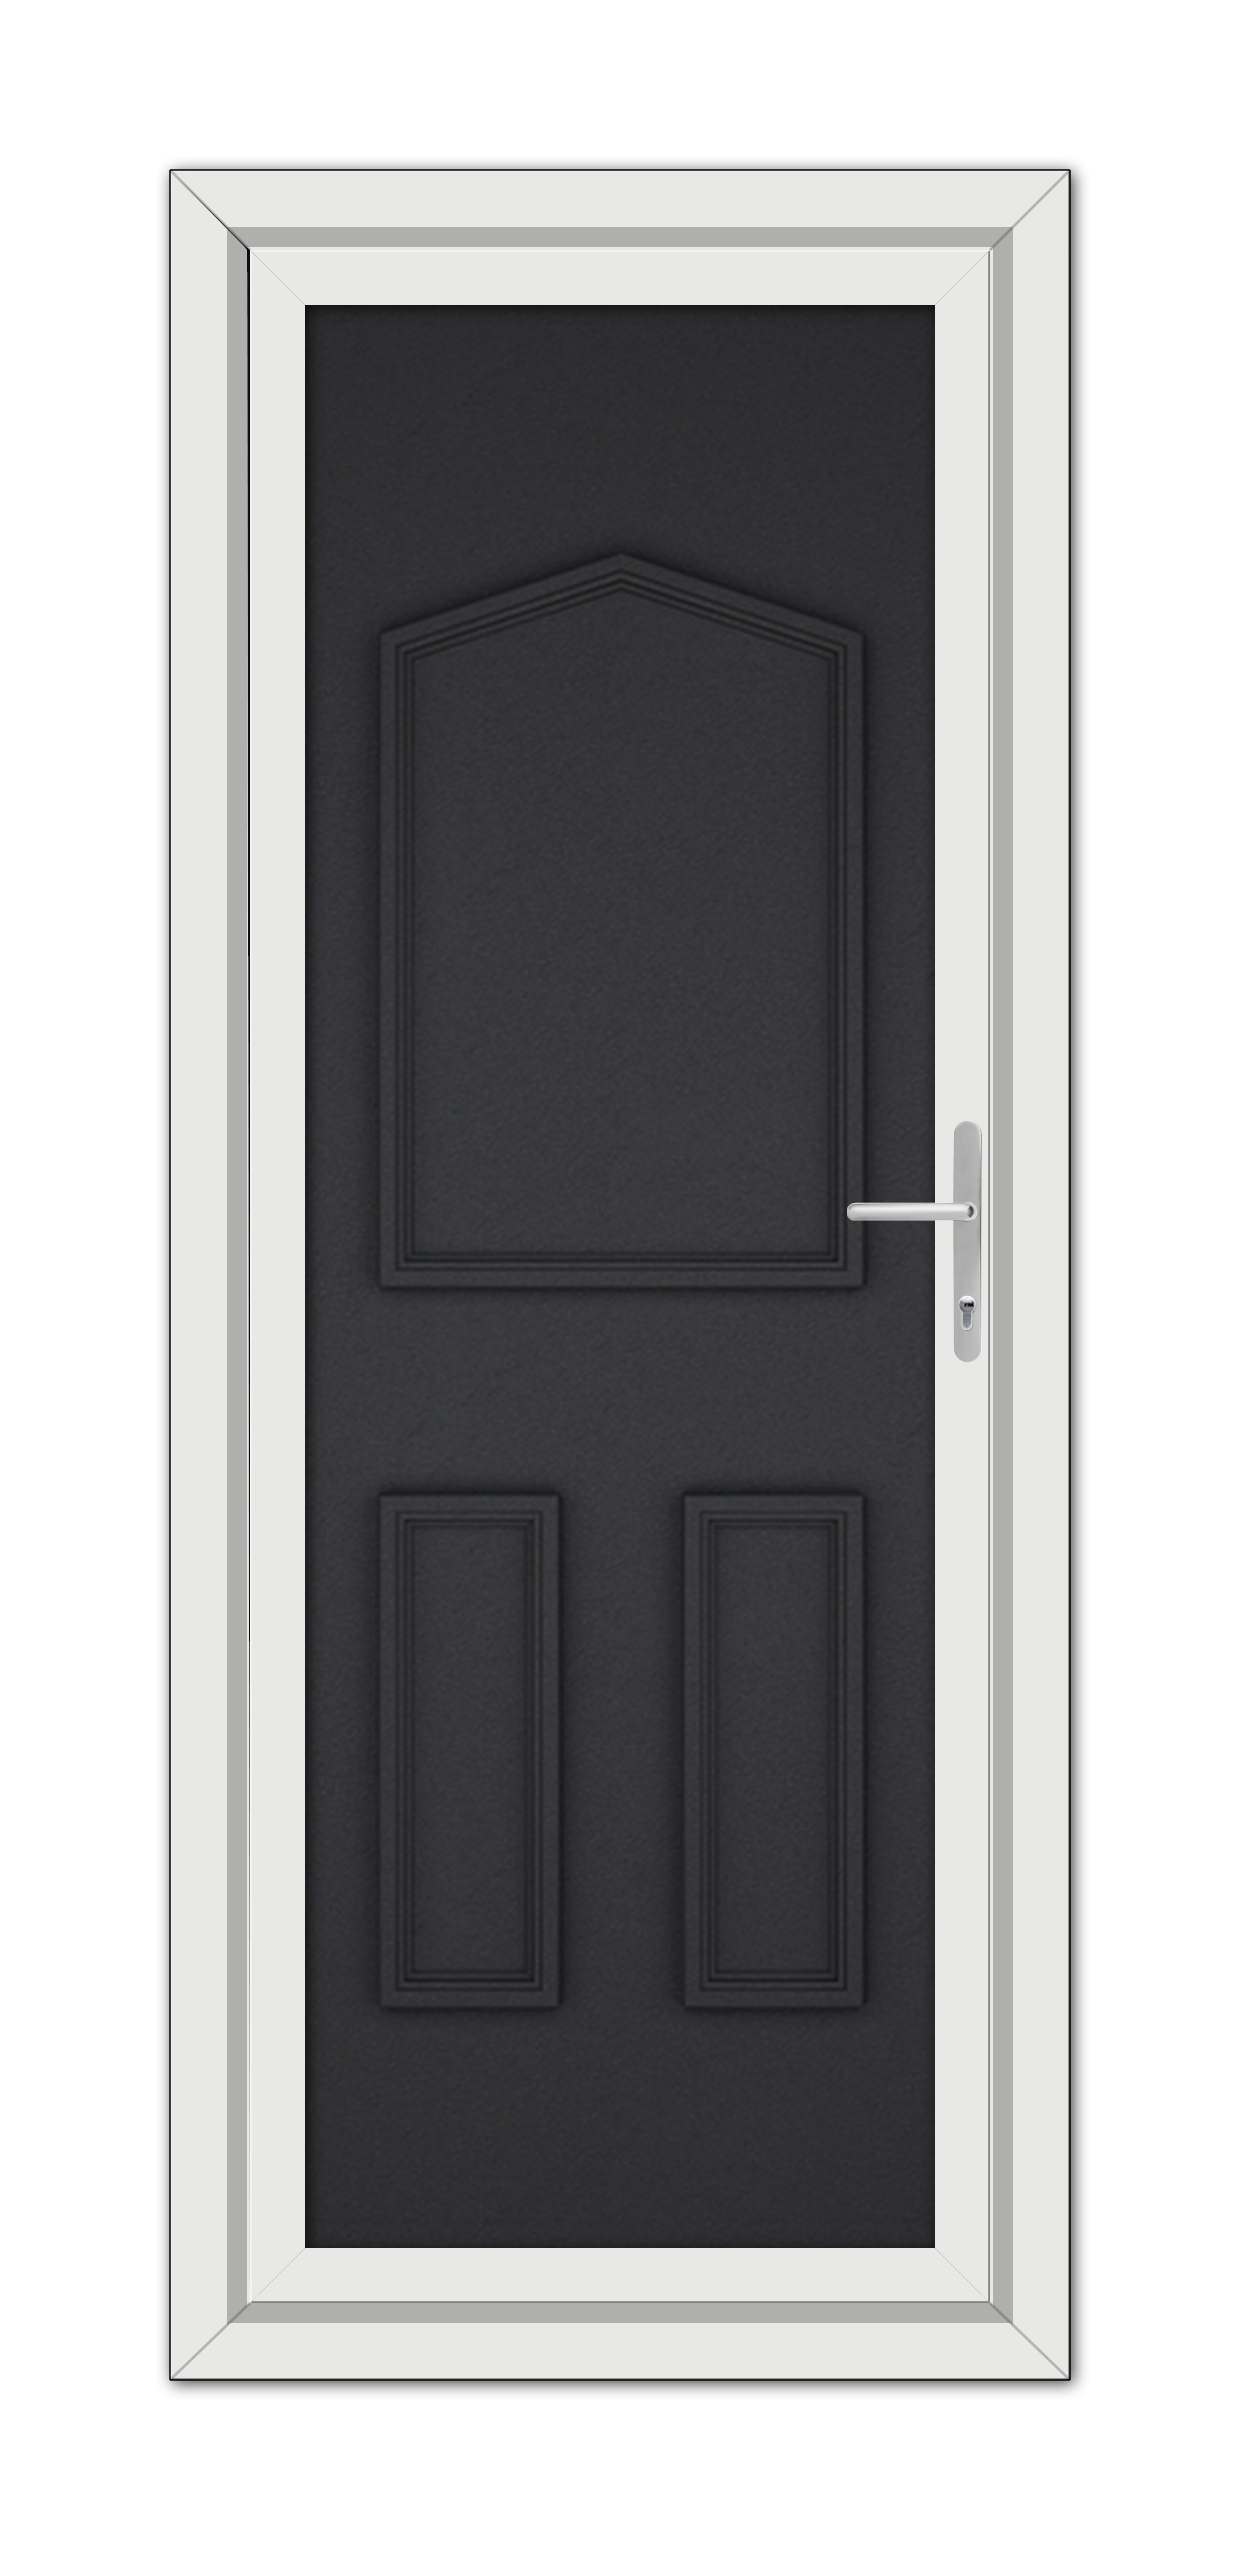 A modern Black Brown Oxford Solid uPVC door with three panels, featuring a silver handle, set within a white door frame.